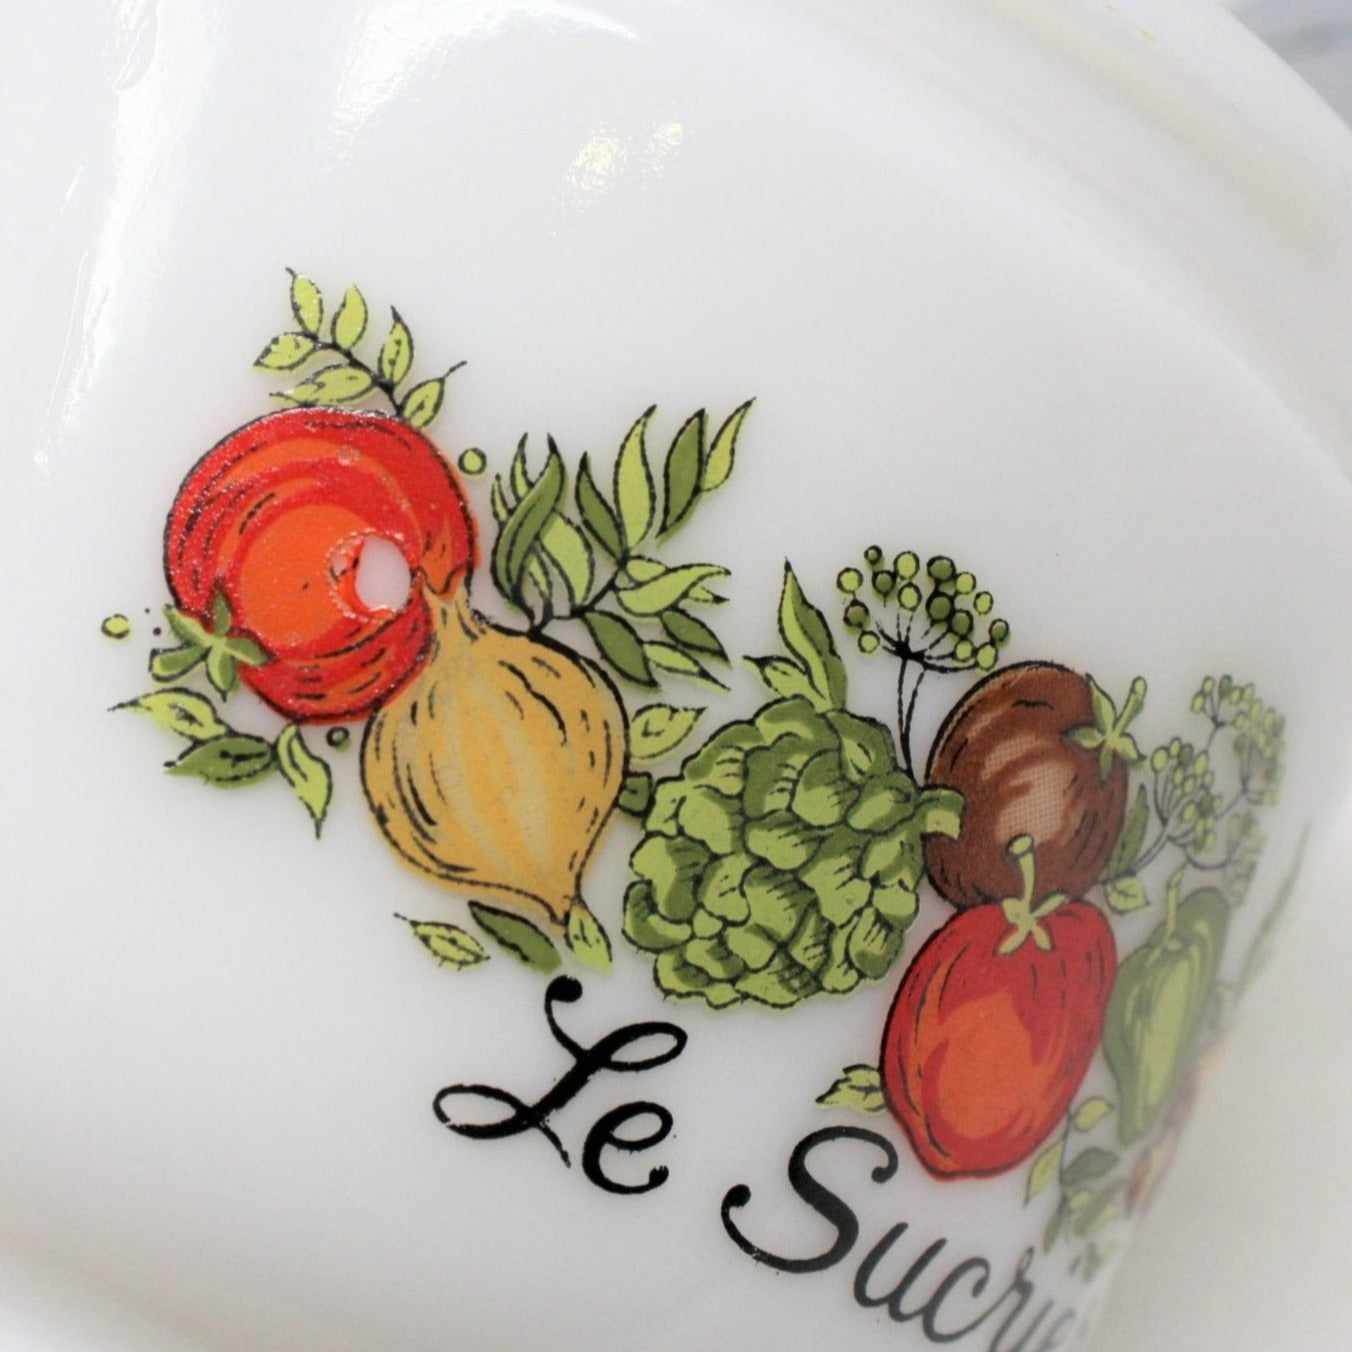 Sugar Bowl with Lid, Gemco-Ware Spice of Life, Le Sucrier, Corning, Vintage